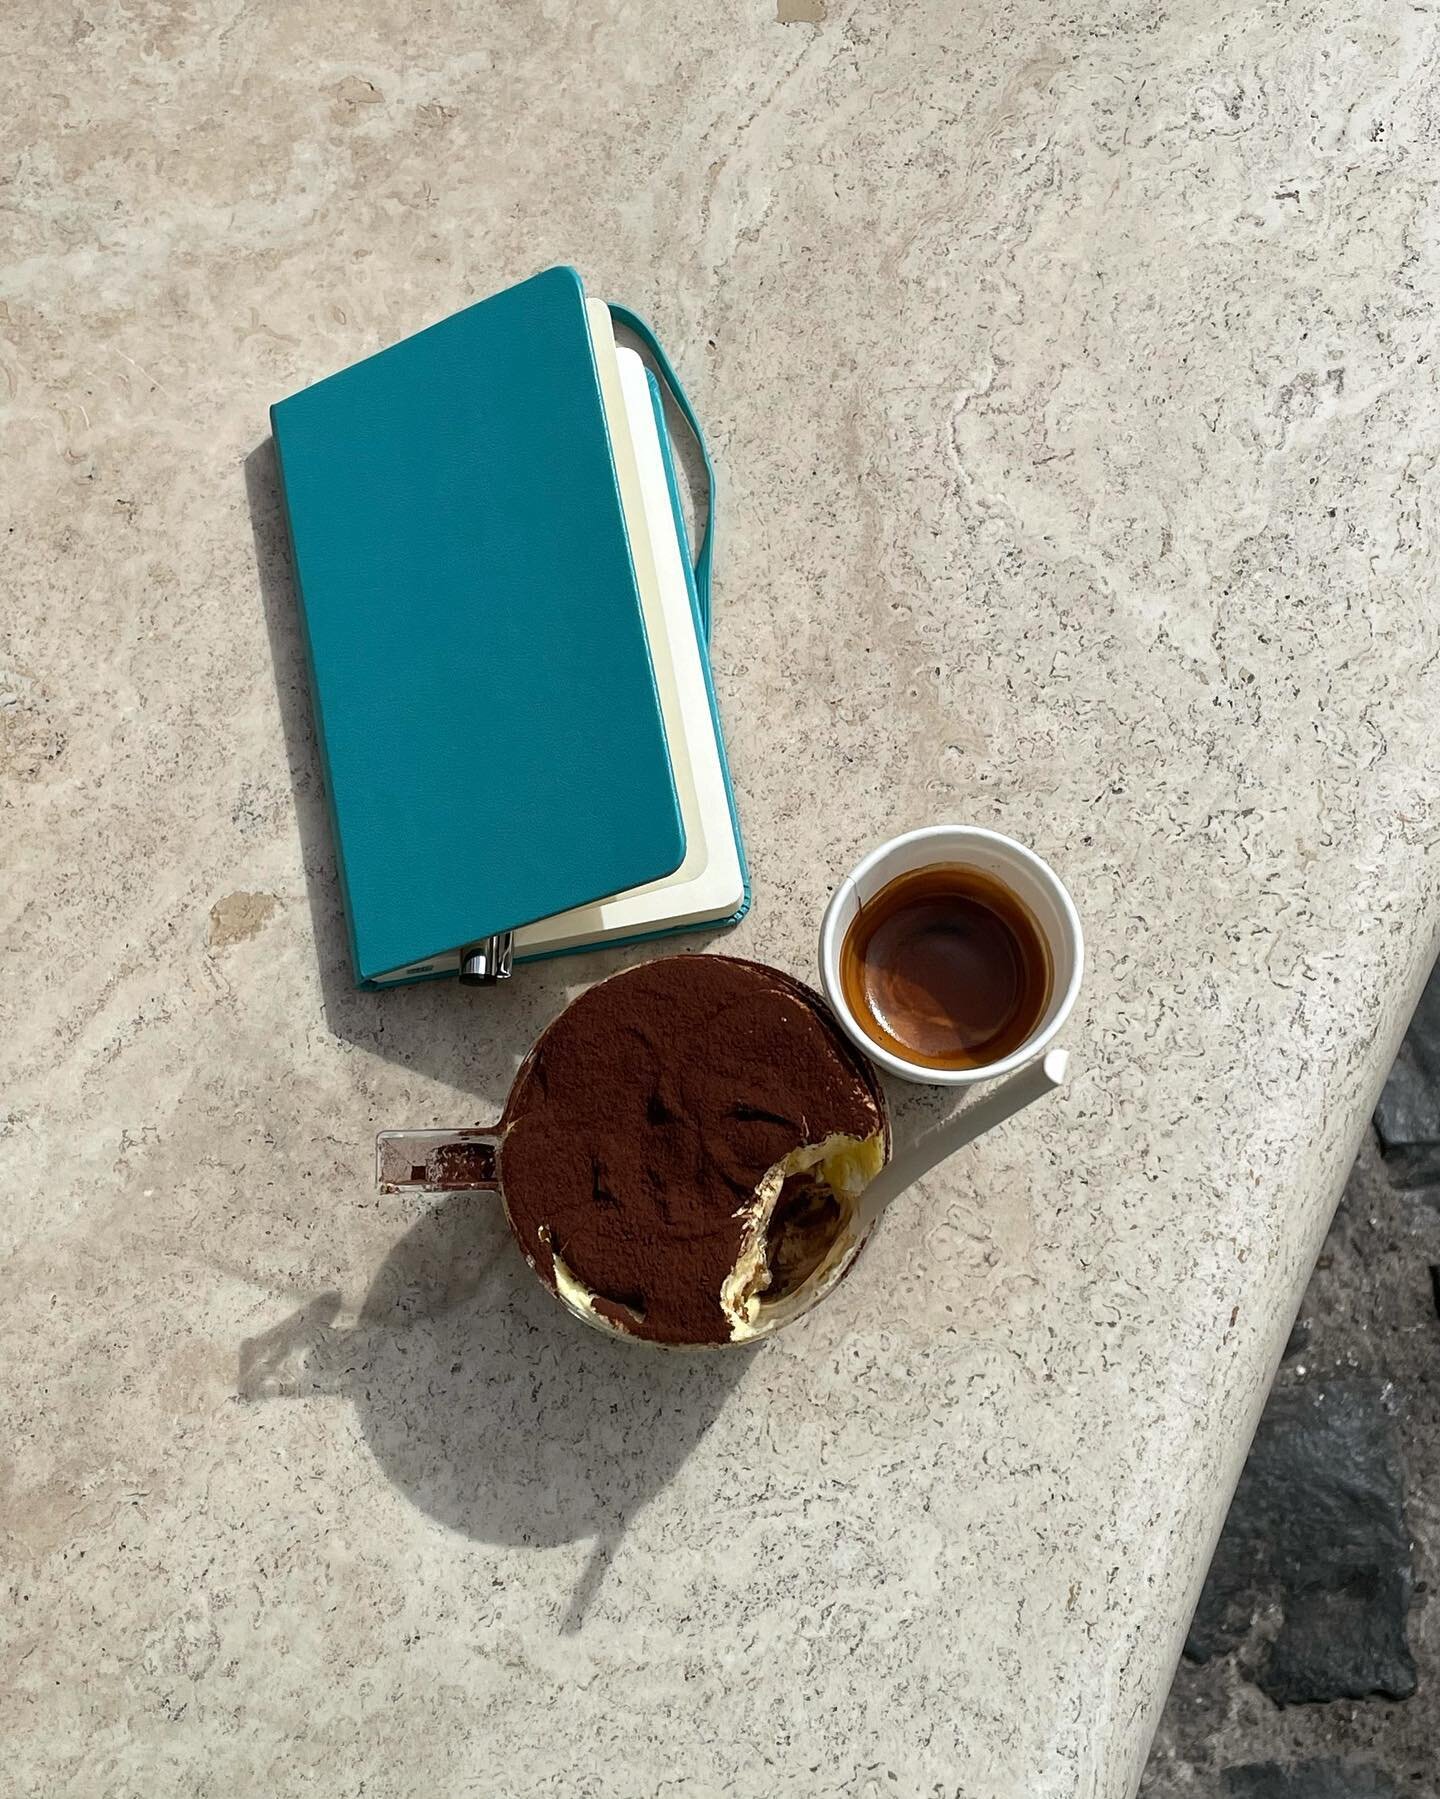 Espresso, tiramis&ugrave; &amp; journaling: a self portrait🤍 

New episode coming soon! Stay tuned🥰
.
.
.
.
.
@meditationable #meditationable